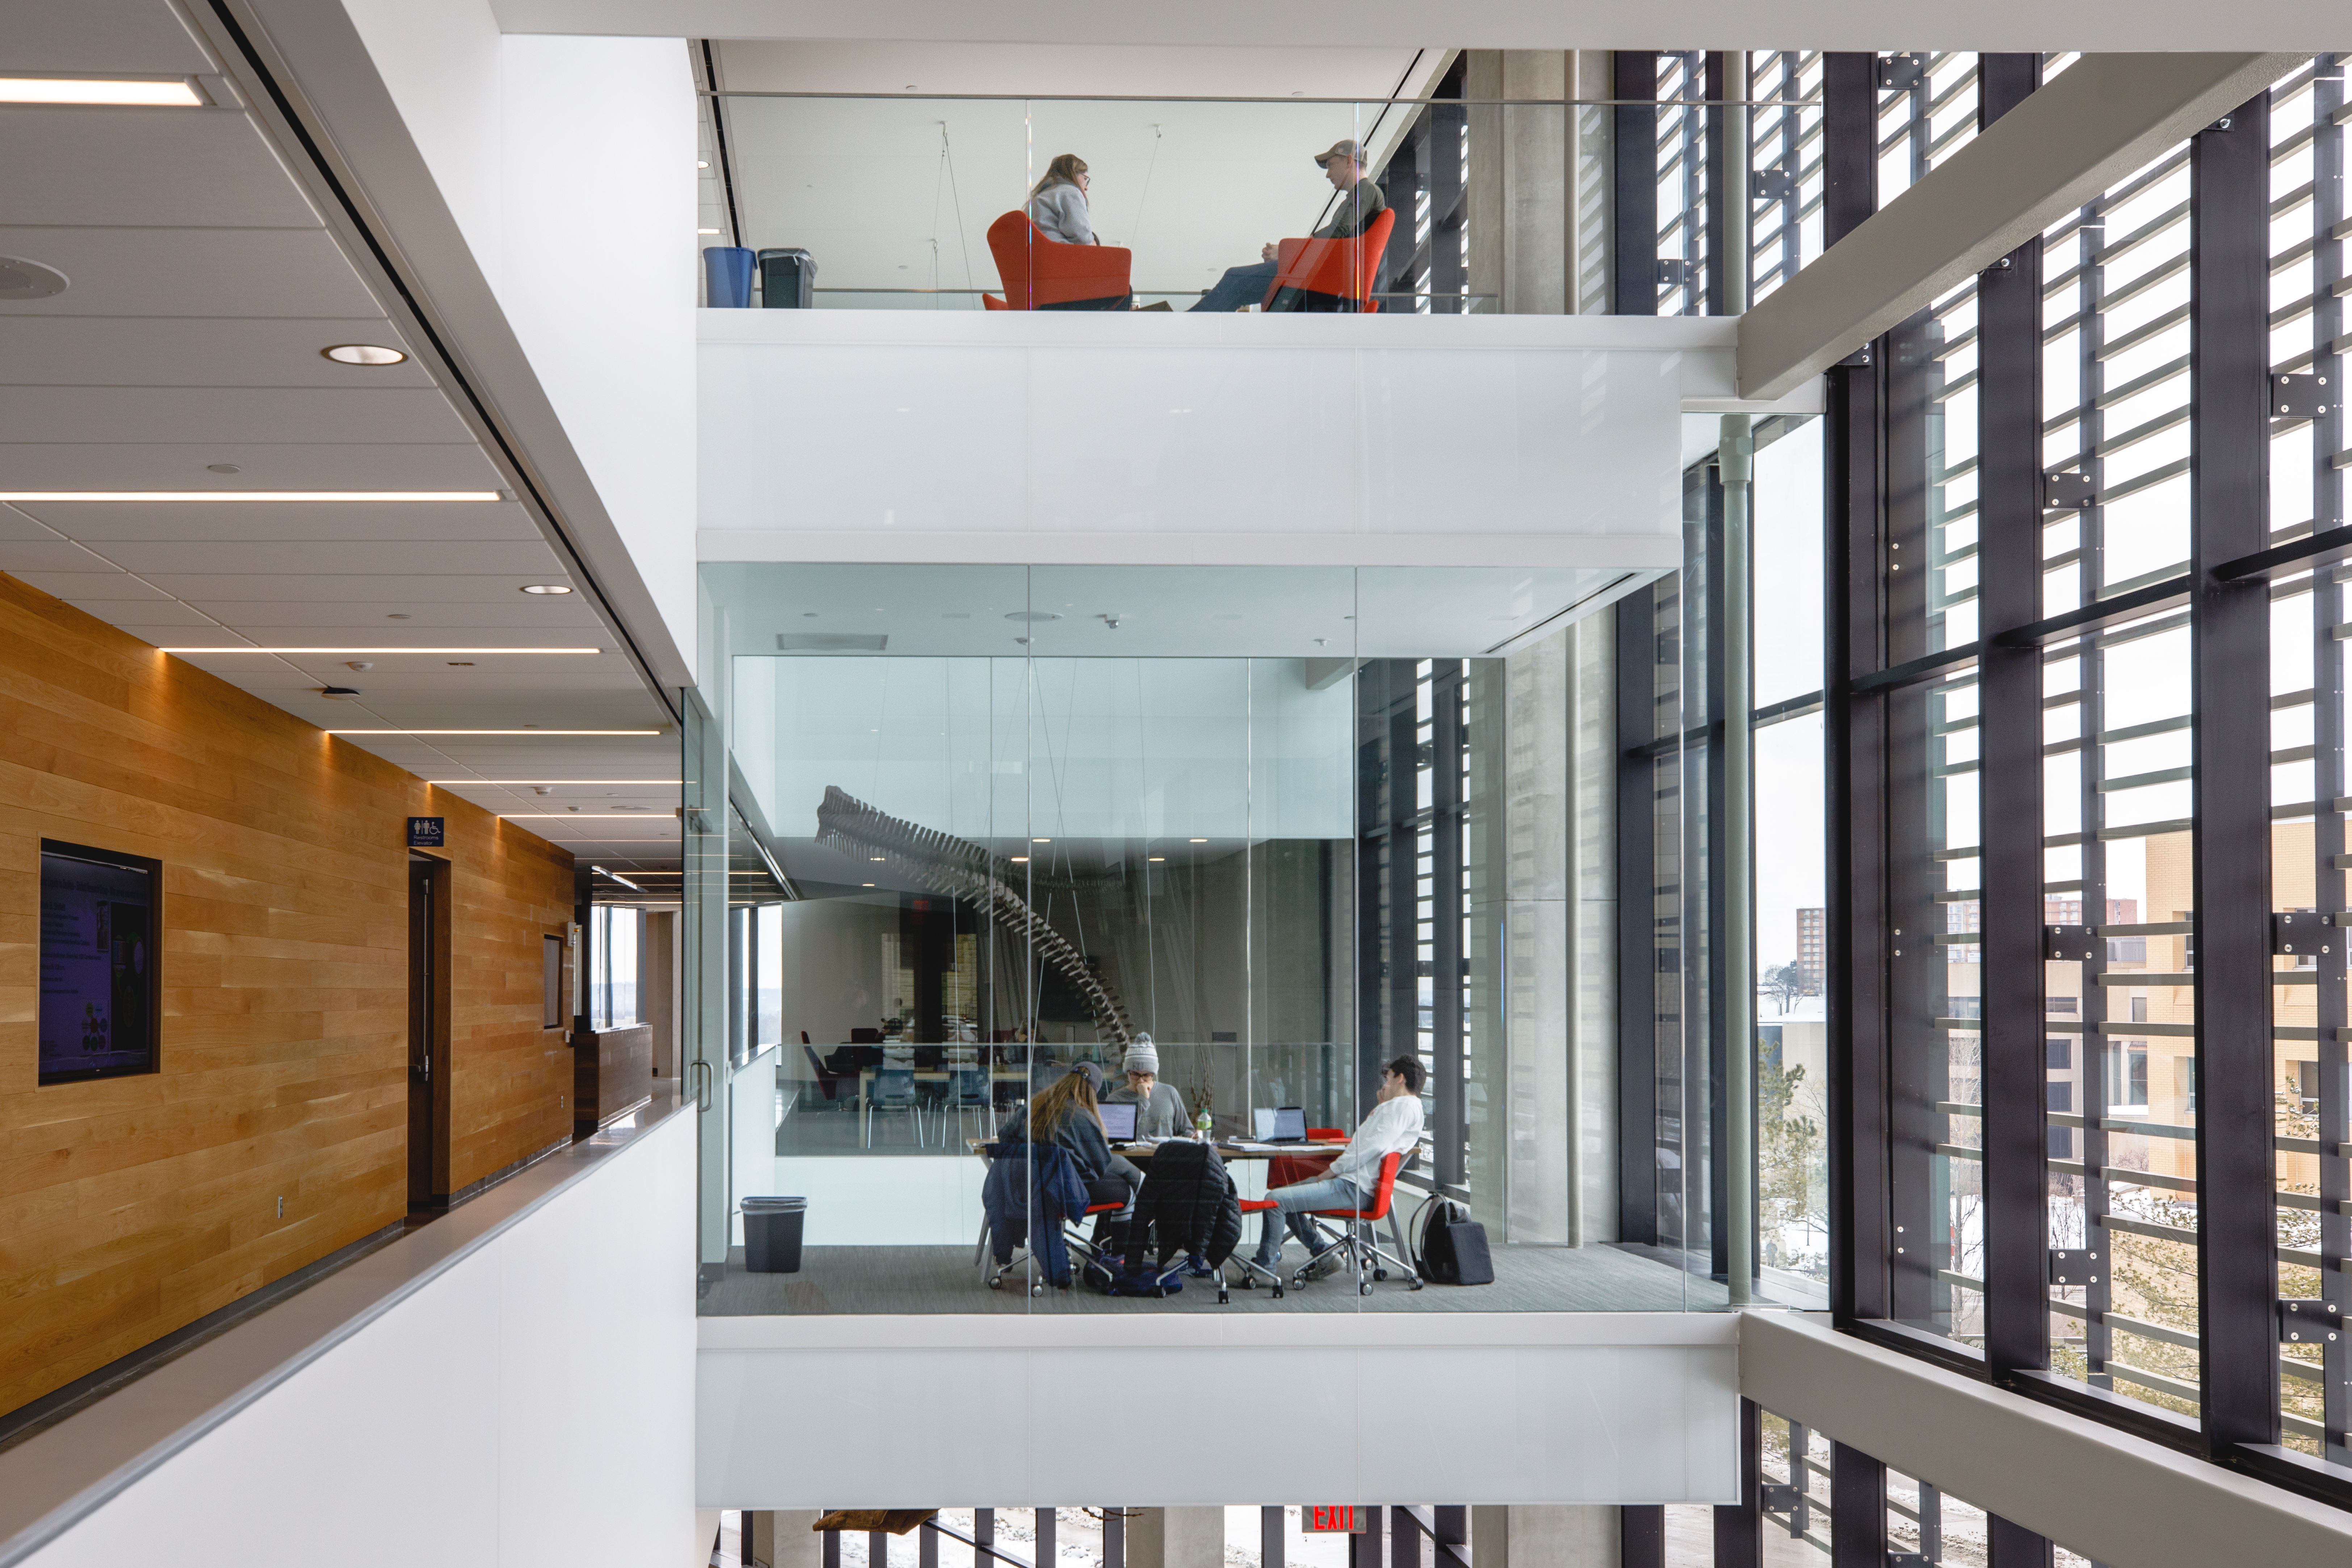 The interior of the Earth, Energy & Environment Center is a spacious combination of study areas and classrooms